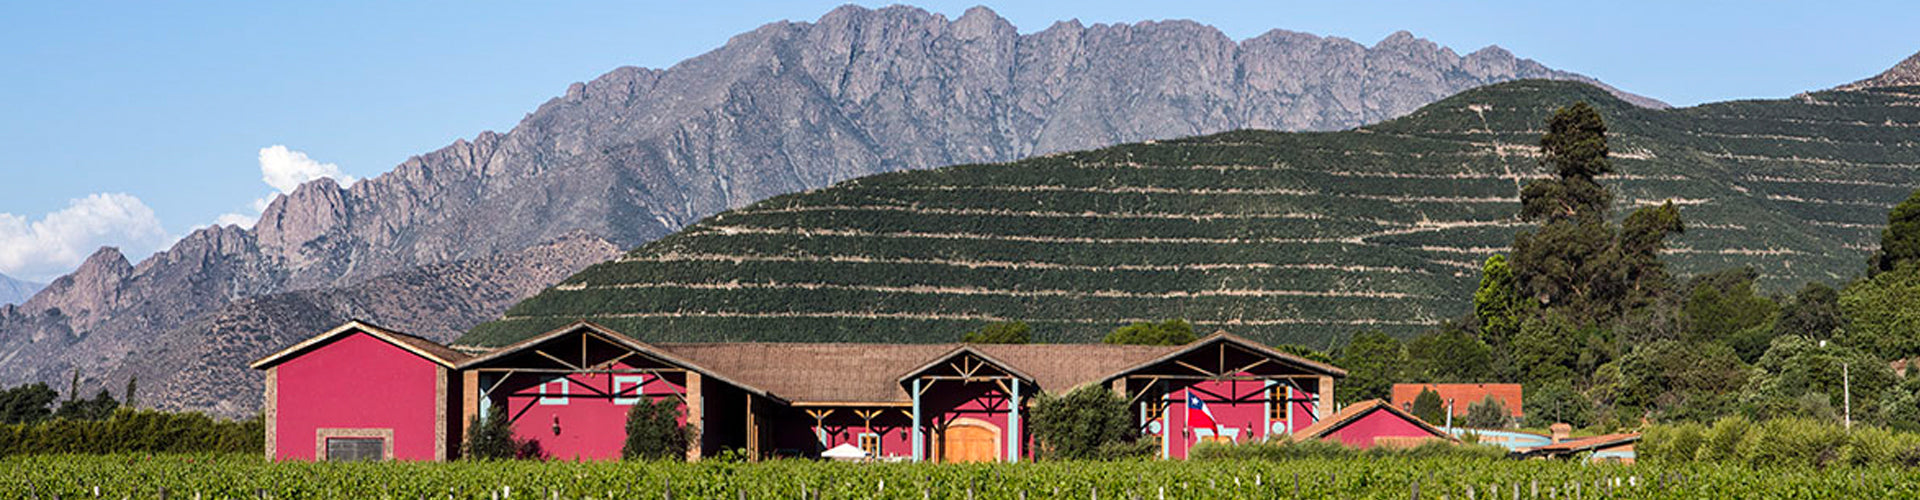 The Viña Von Siebenthal Winery and Vineyards in Aconcagua Valley